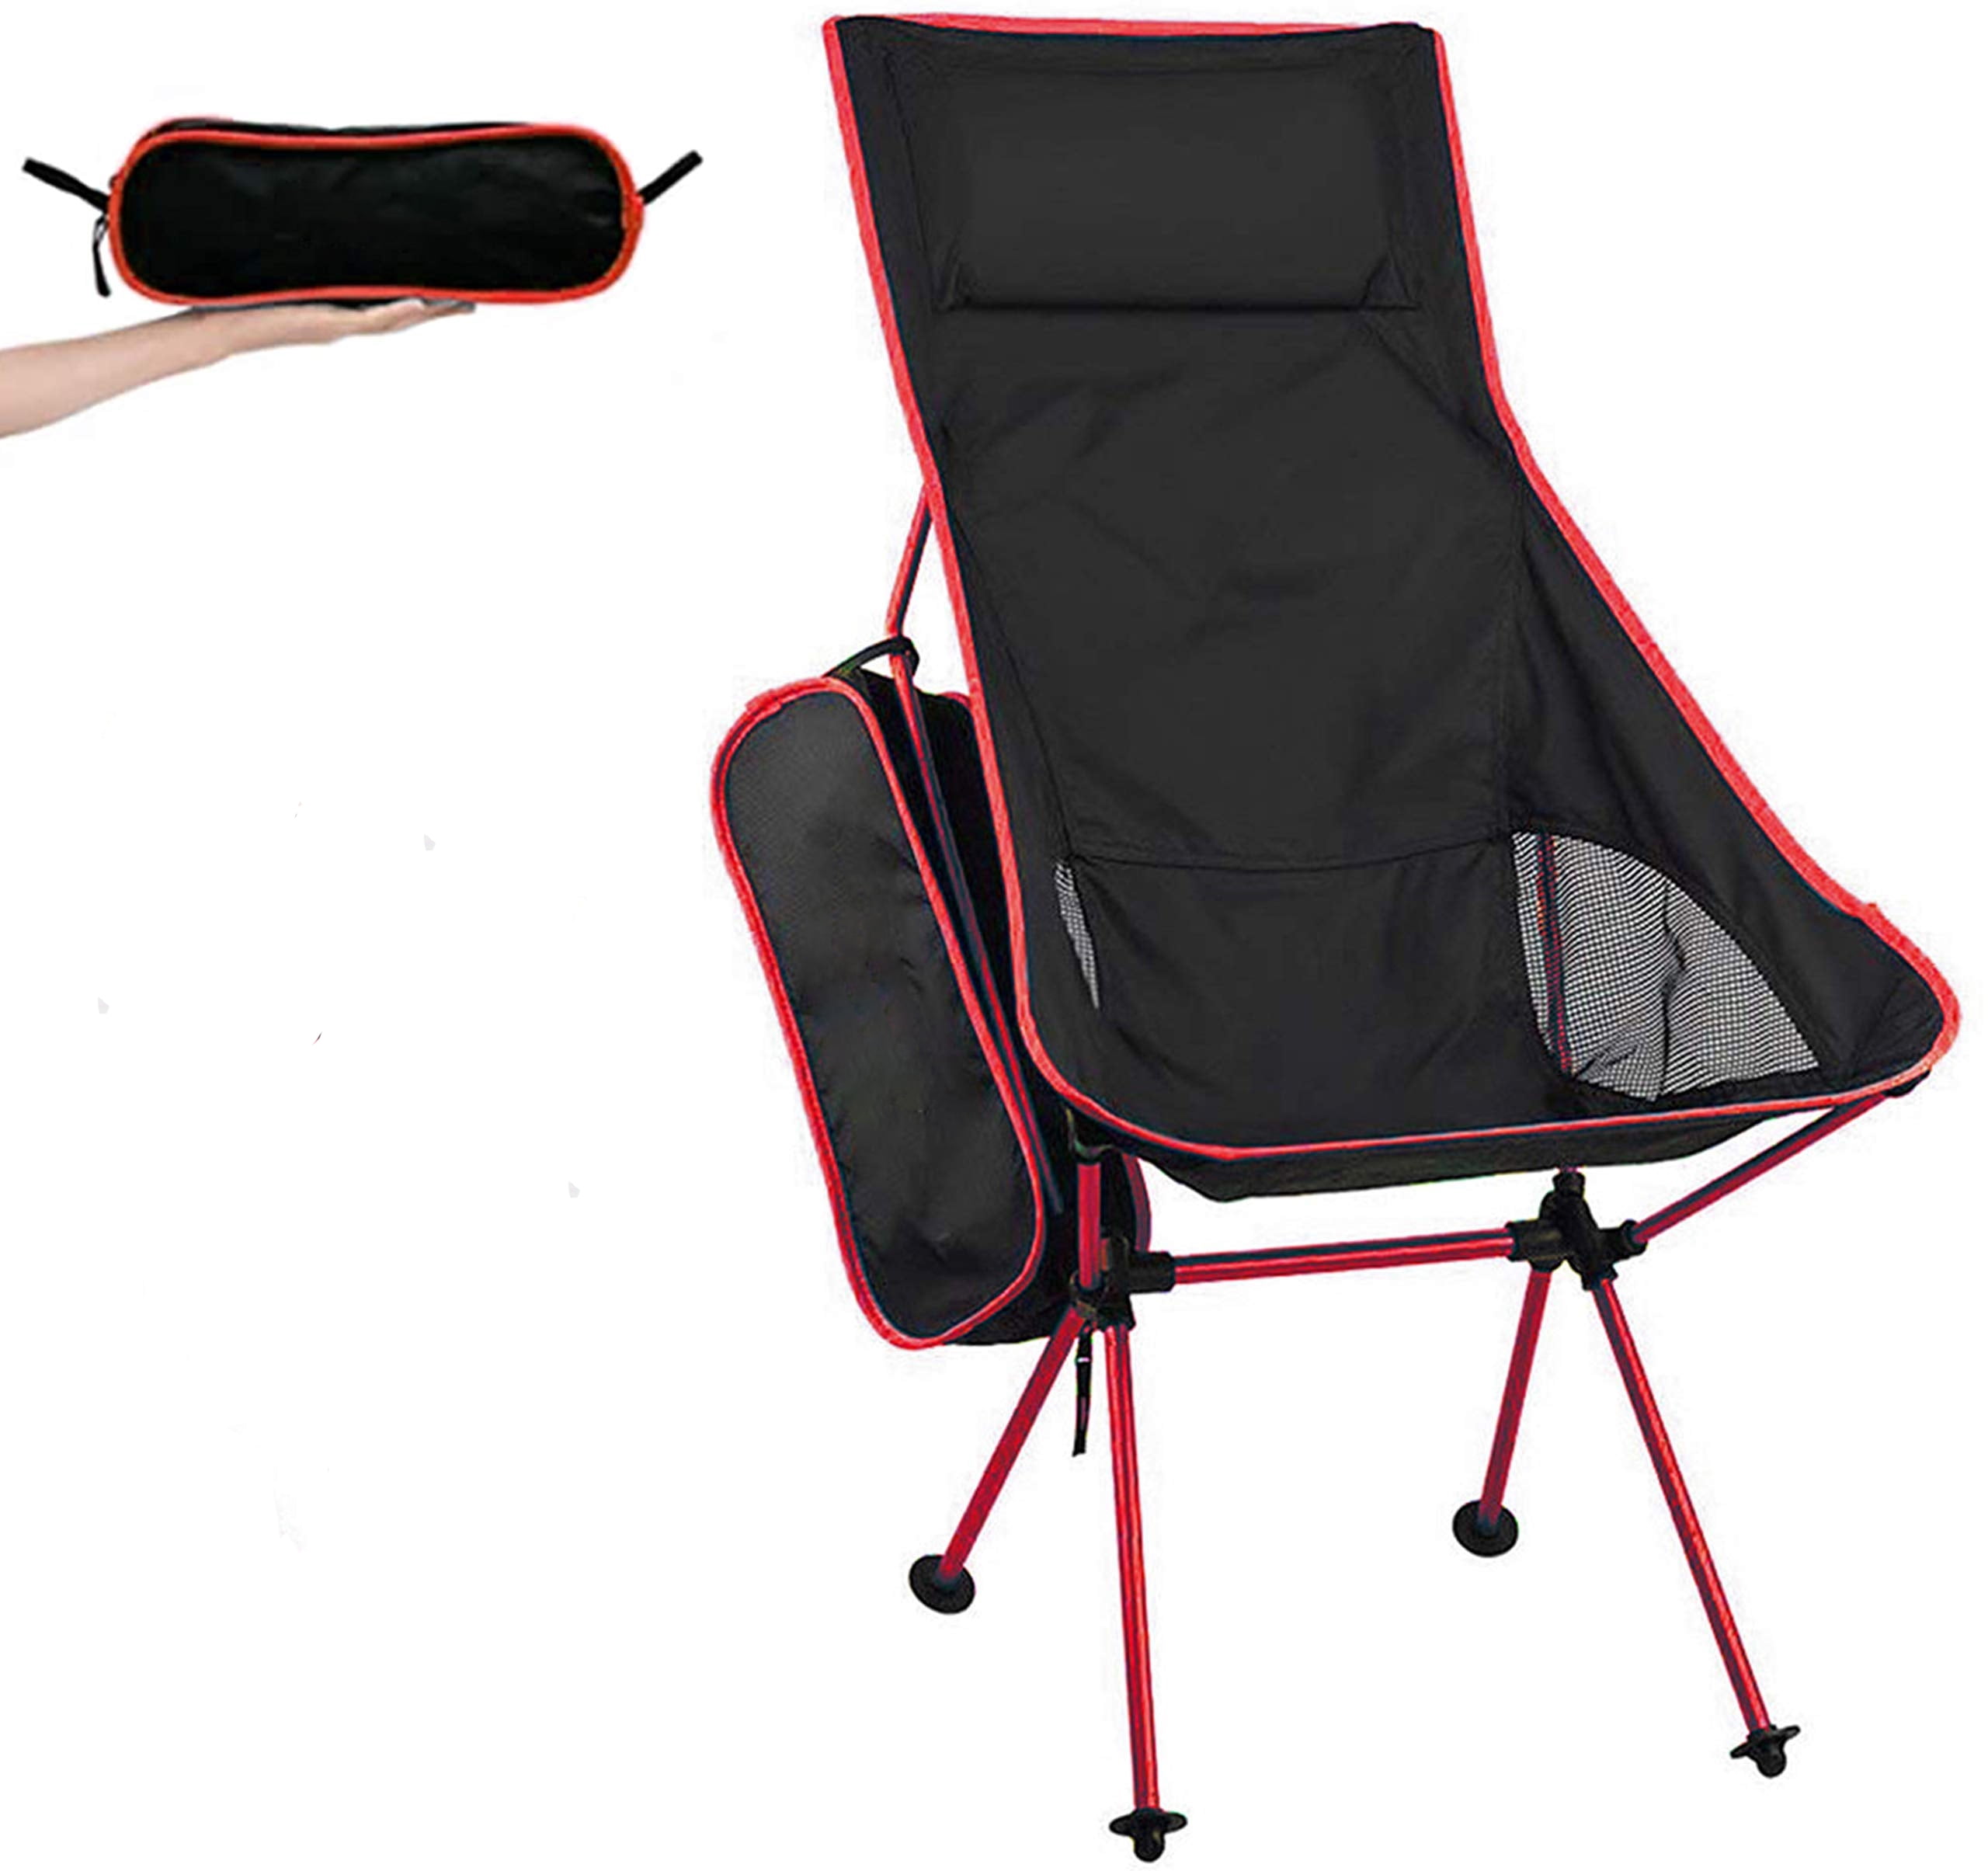 BBQ,Beach Backpacking miuse Ultralight Backpacking Camping Chair,portable Folding Compact Camping Chair for Outdoor Camping Picnic Hiking